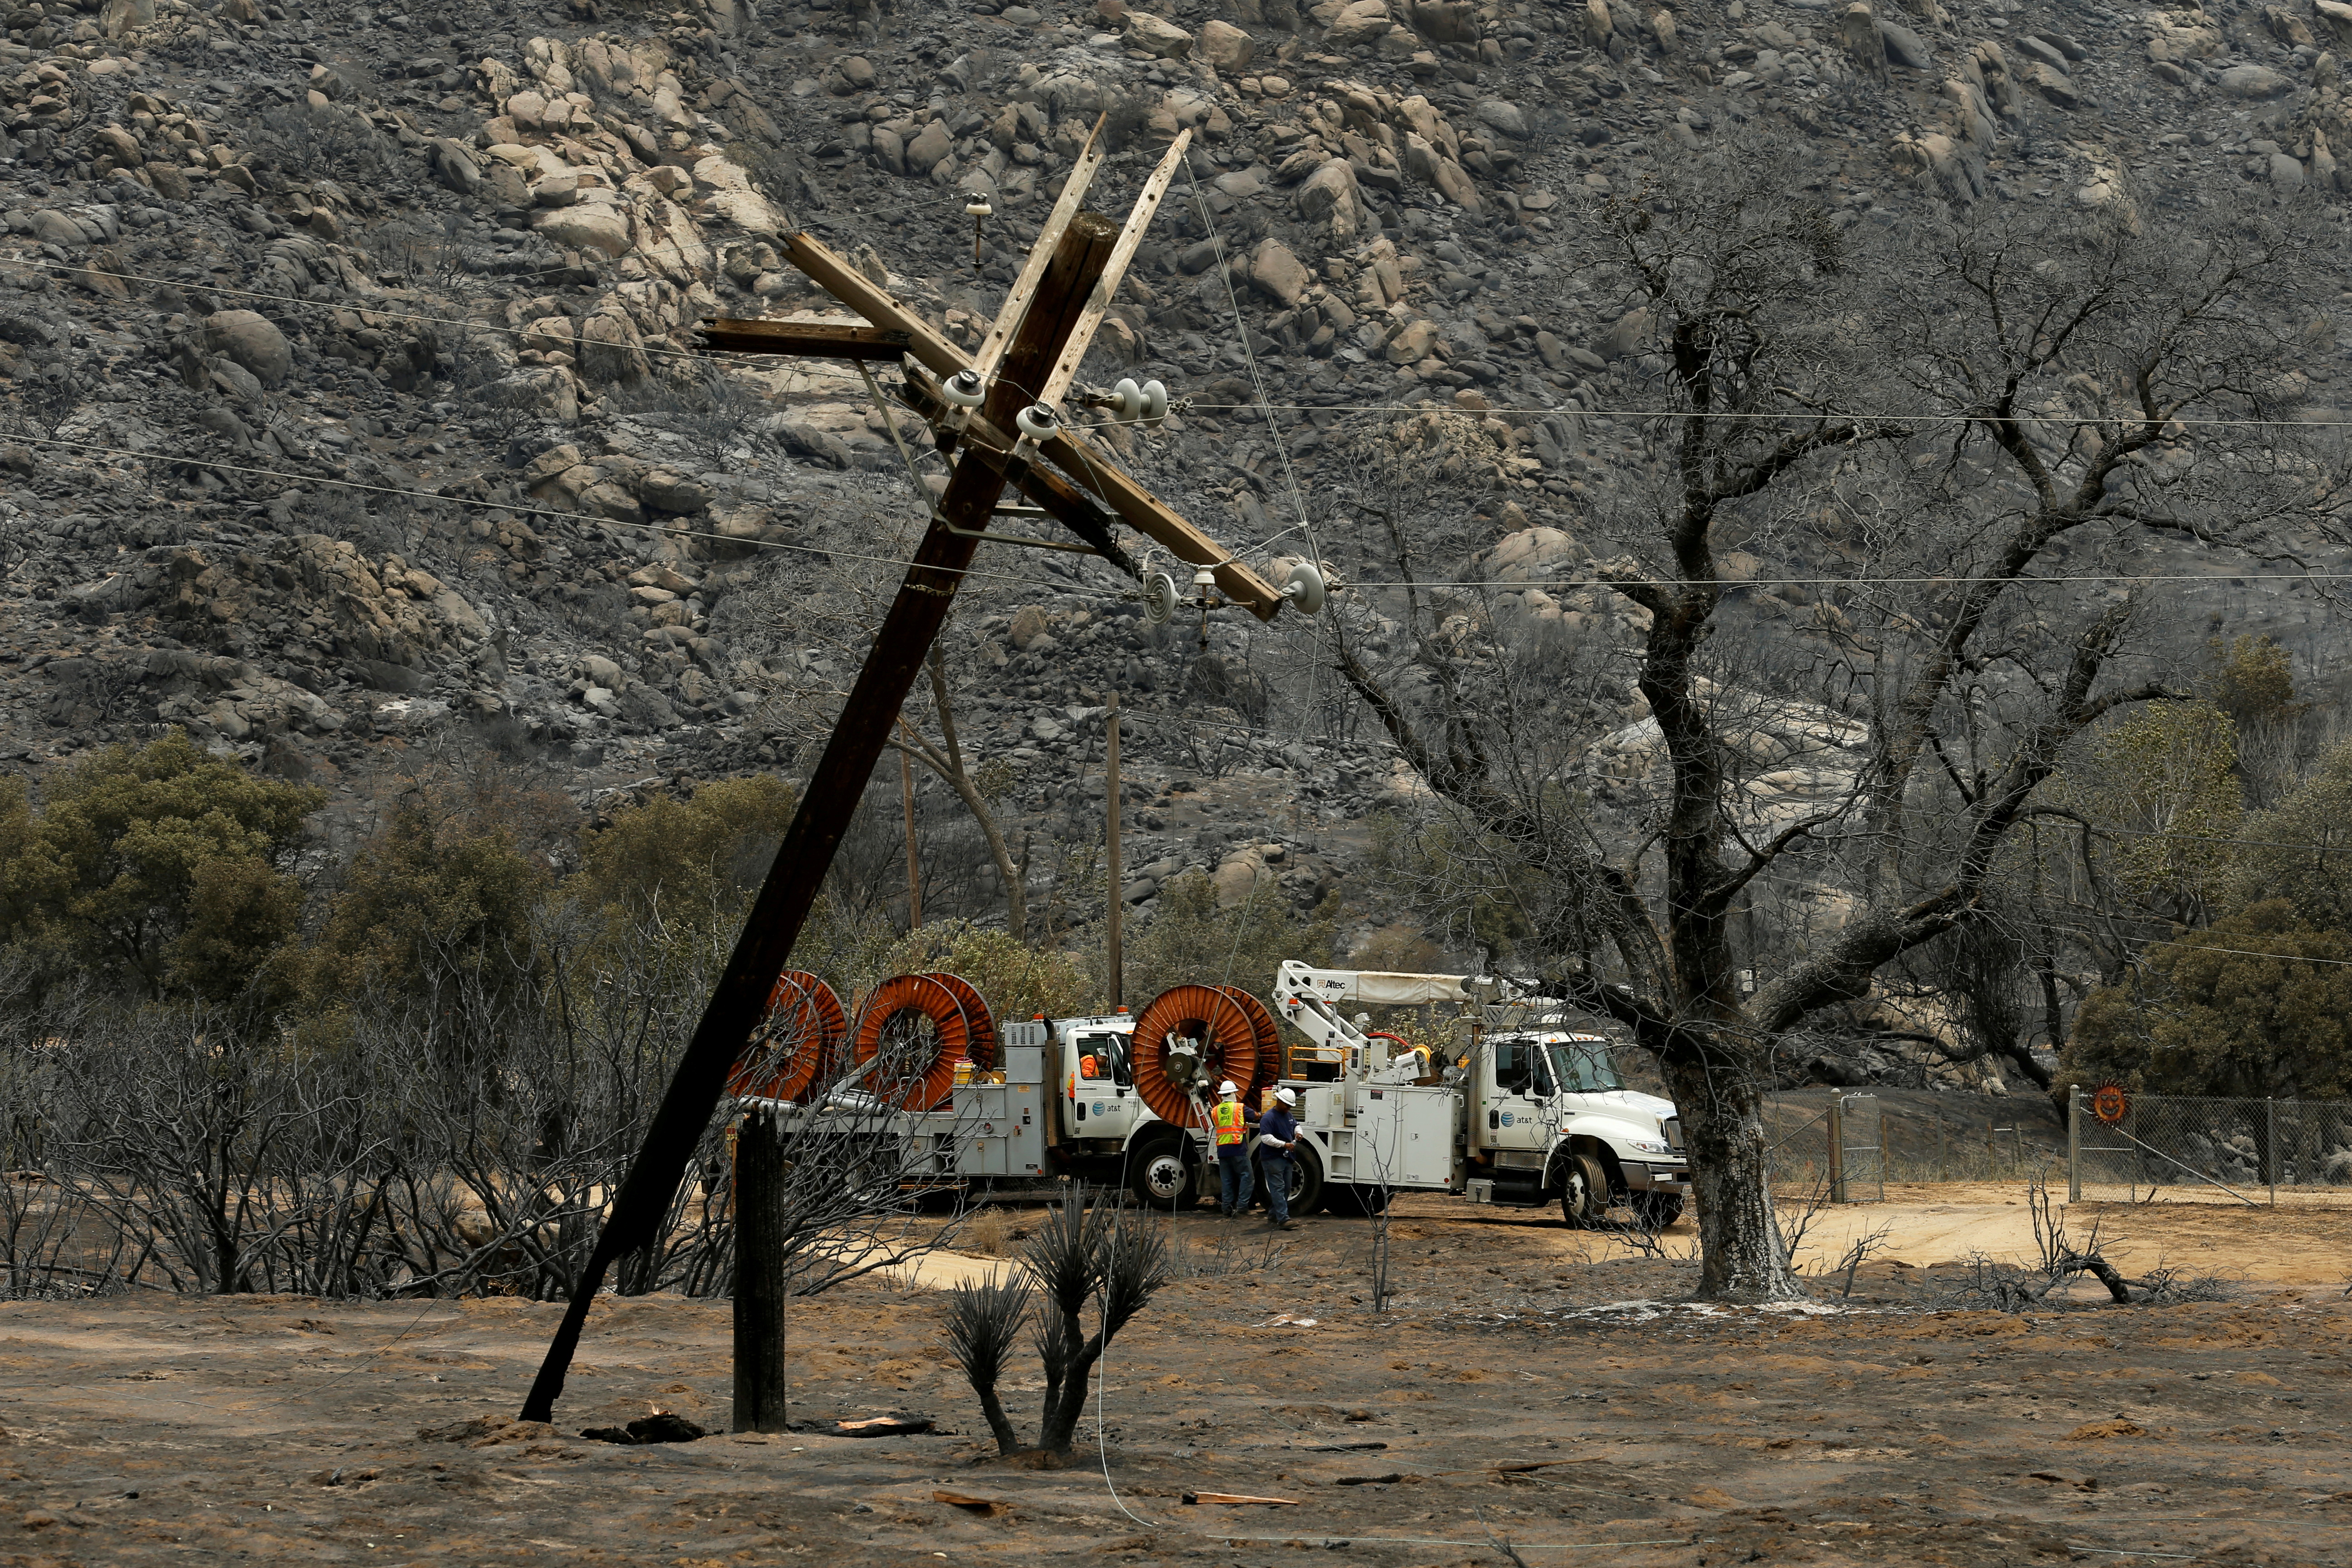 Utility workers begin work repairing power and data lines after a wildfire near Potrero, California, U.S. June 21, 2016. REUTERS/Mike Blake